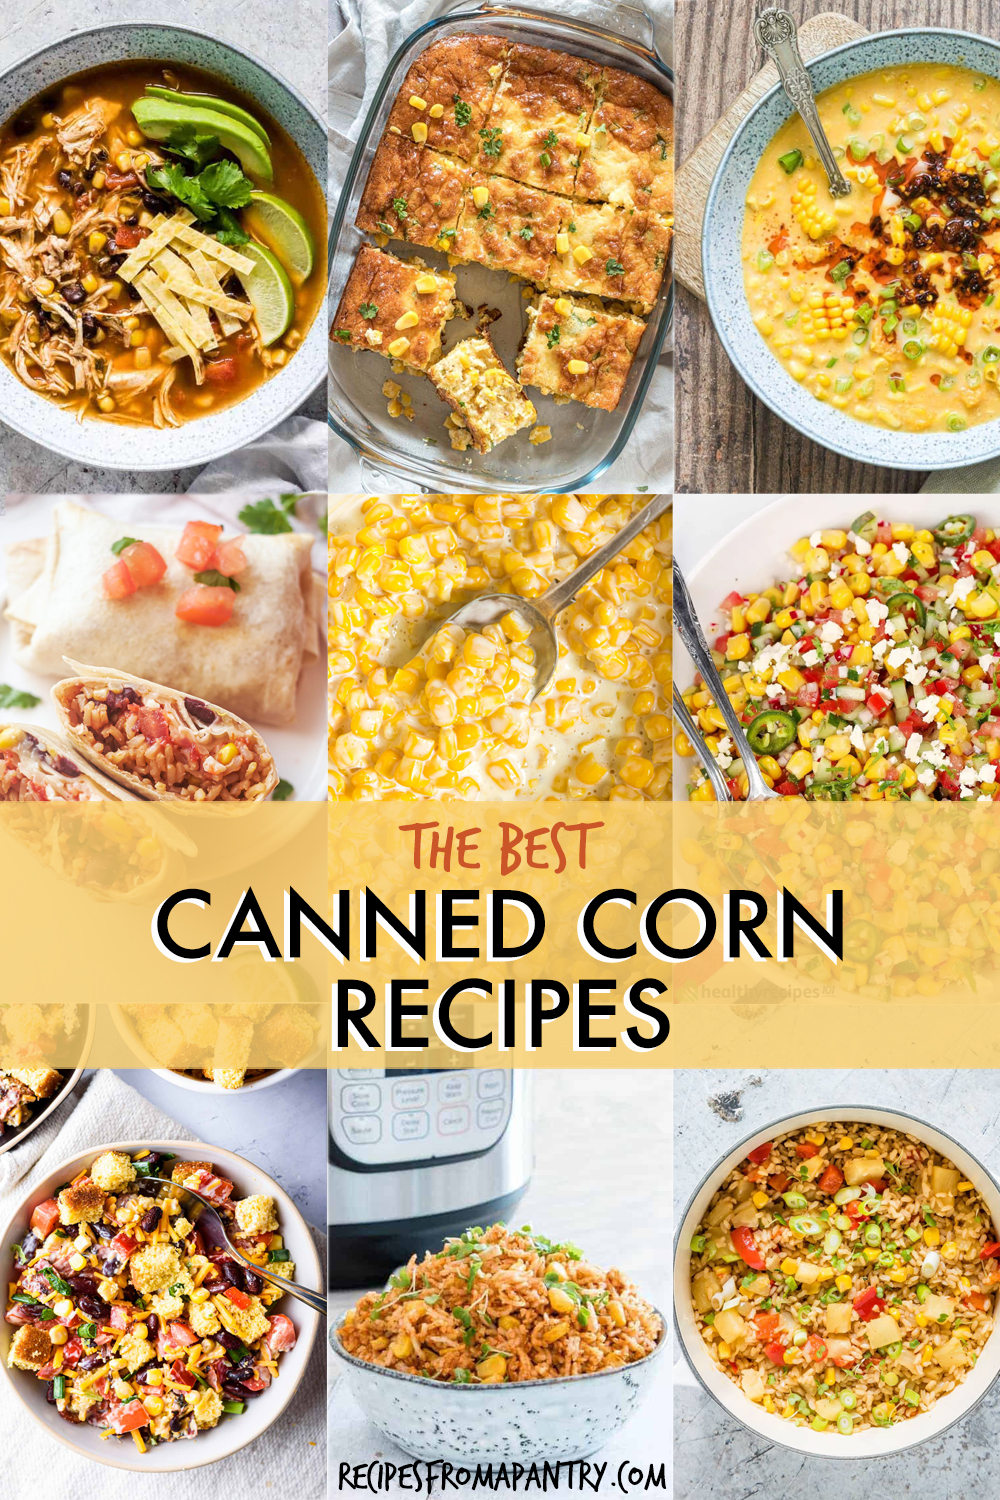 27 Tasty Canned Corn Recipes